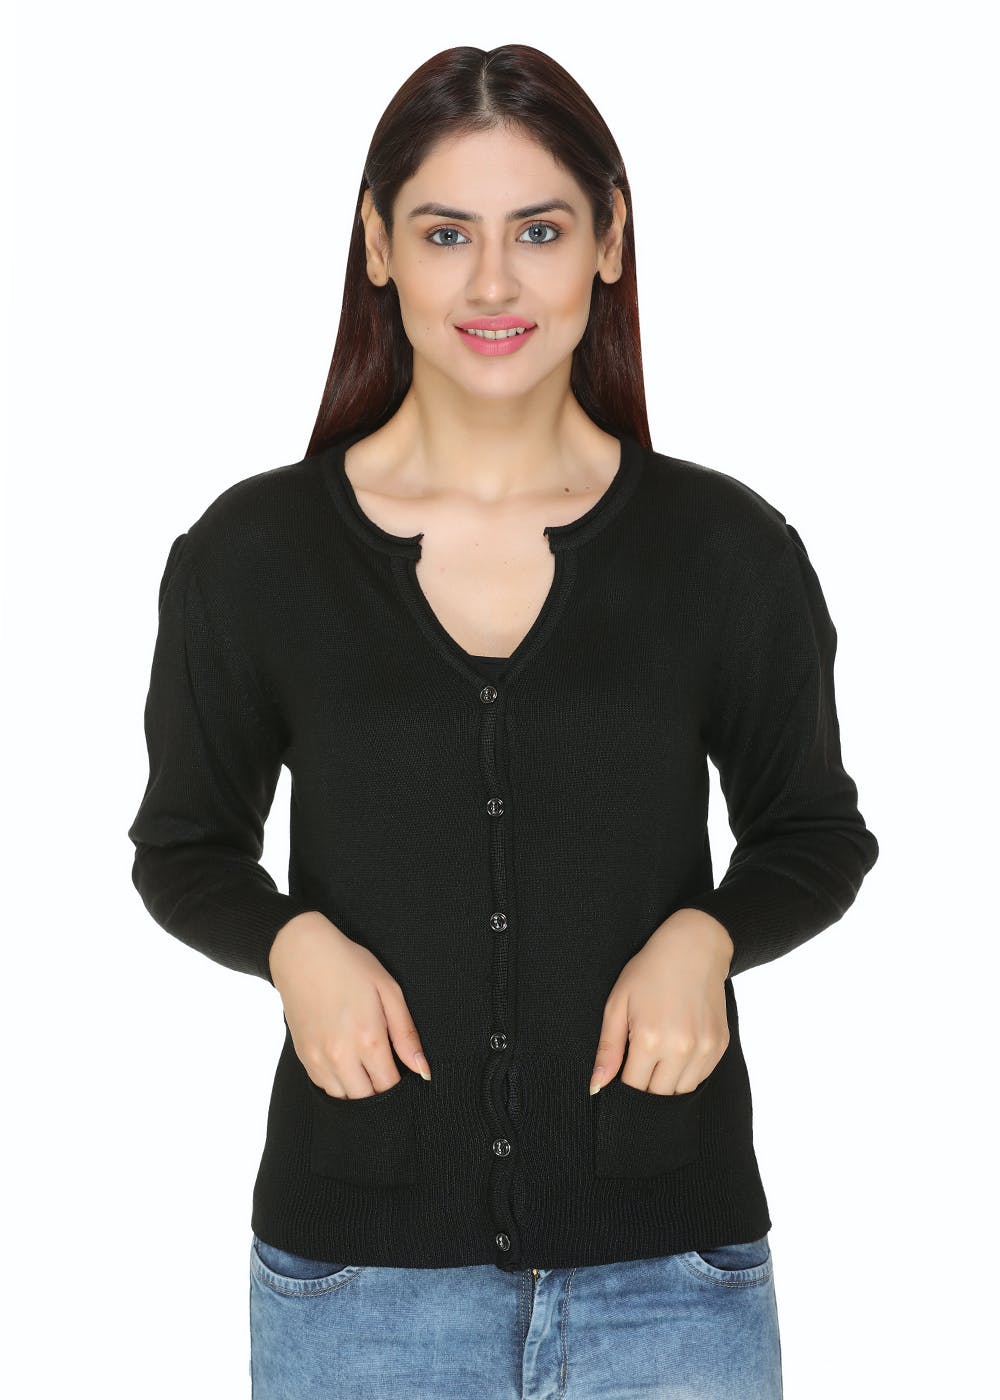 Sweetheart Neck Detail Solid Knit Button Down Cardigan (Freesize) - Black